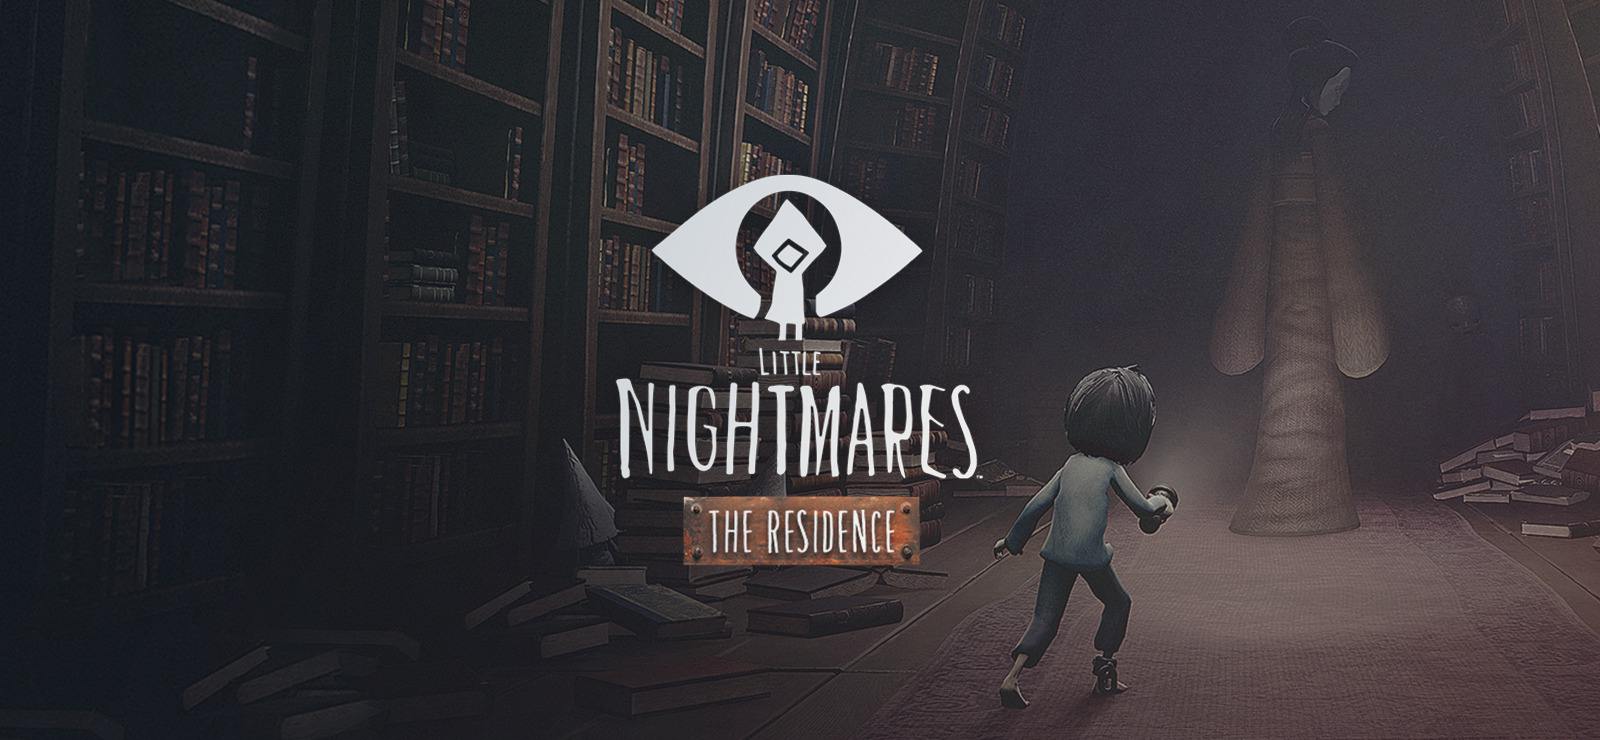 Little Nightmares: The Residence DLC - Puzzle Solutions Guide